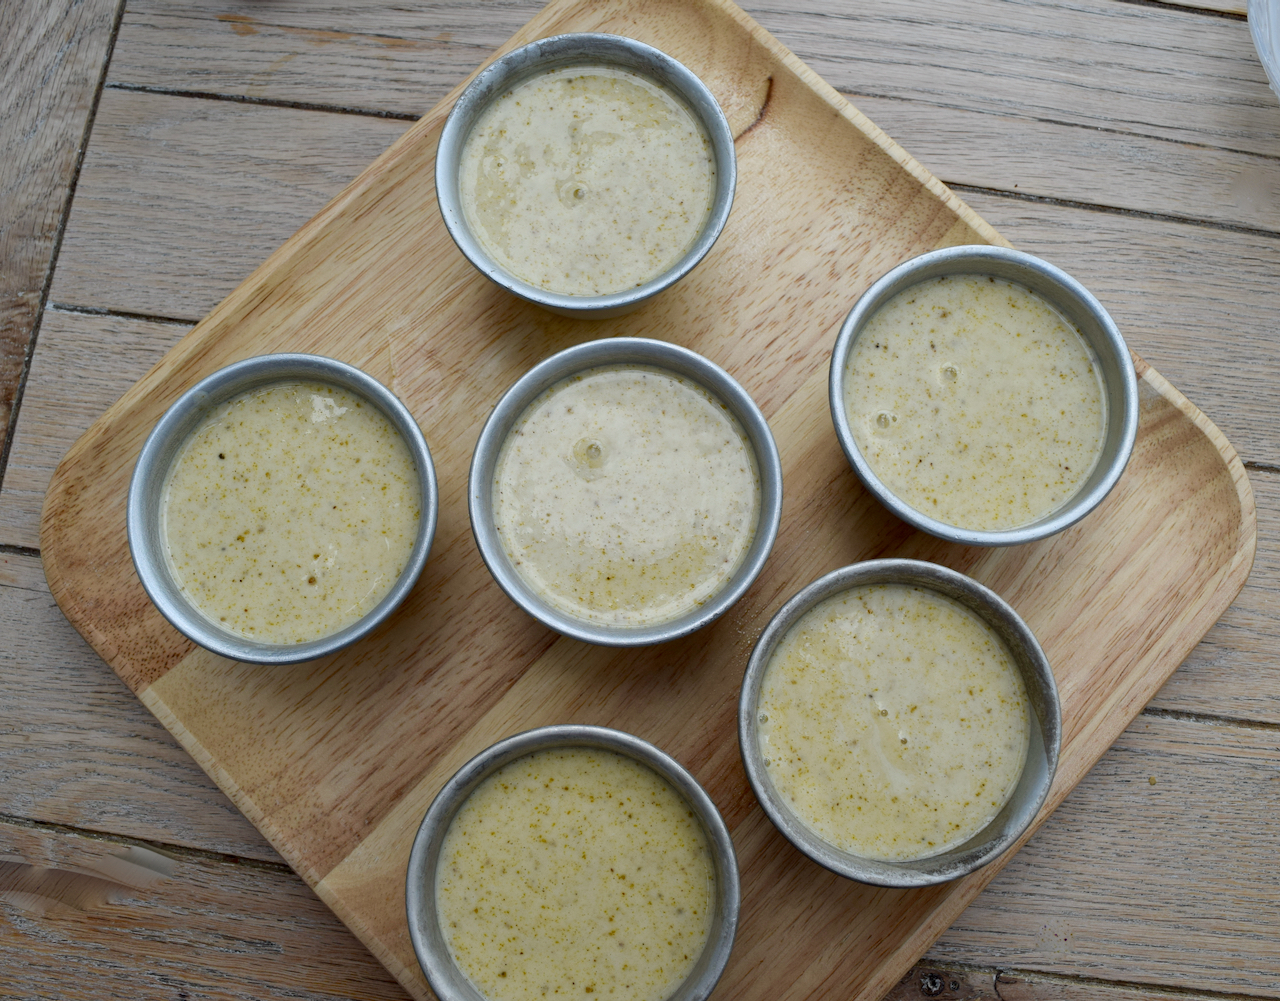 Pistachio Panna Cotta recipe from Lucy Loves Food Blog